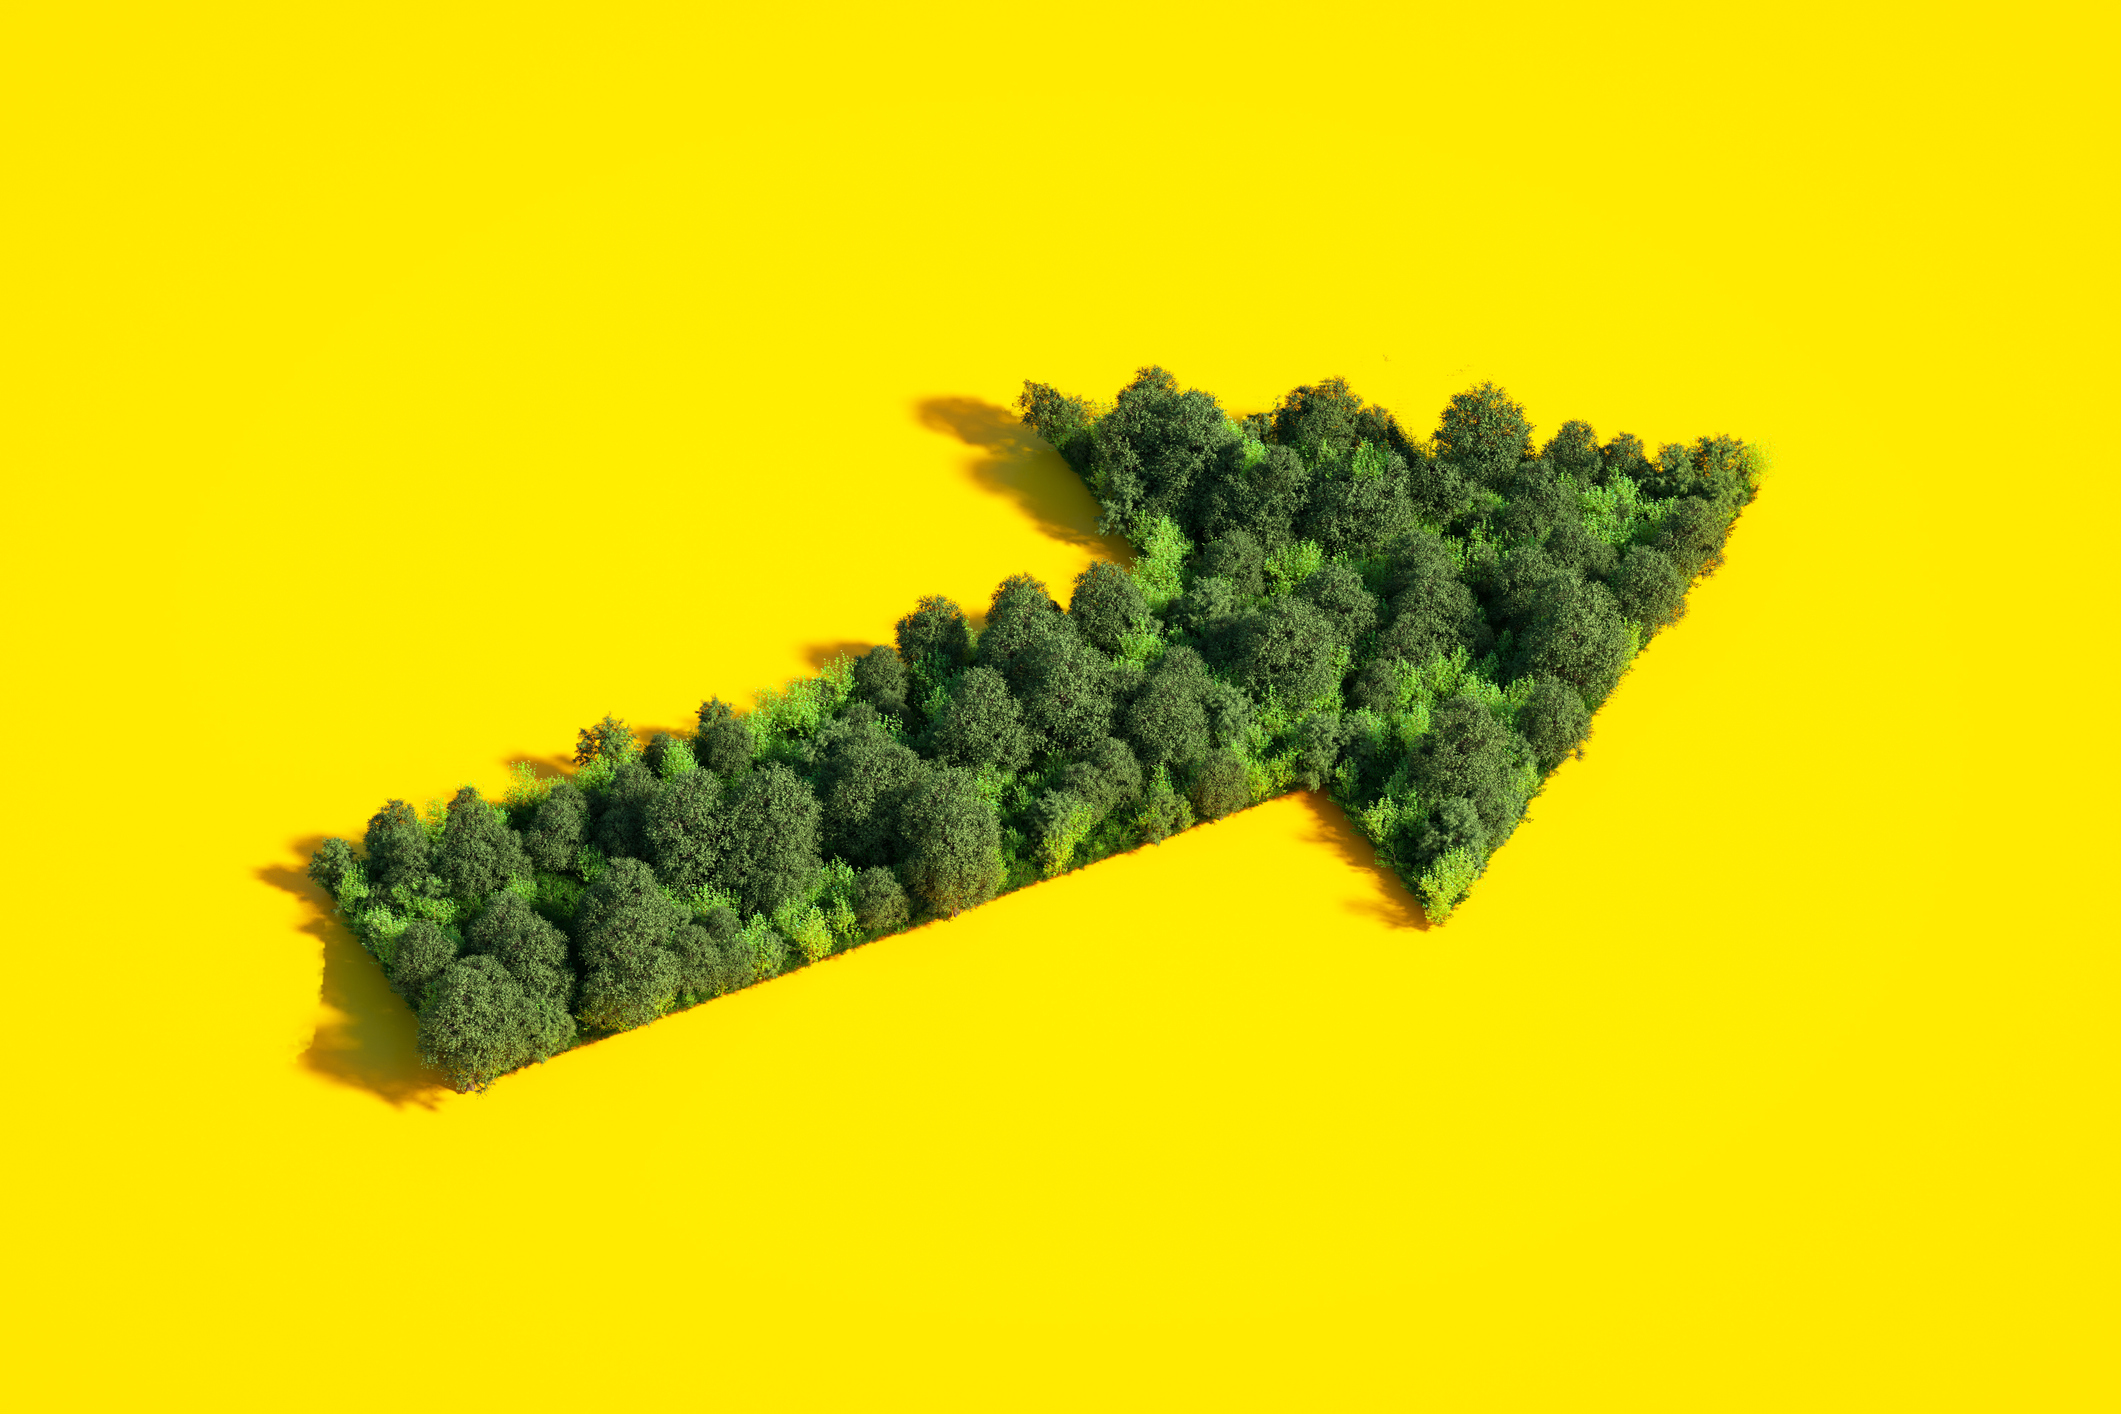 Forest in the shape of arrow sign on a yellow background.